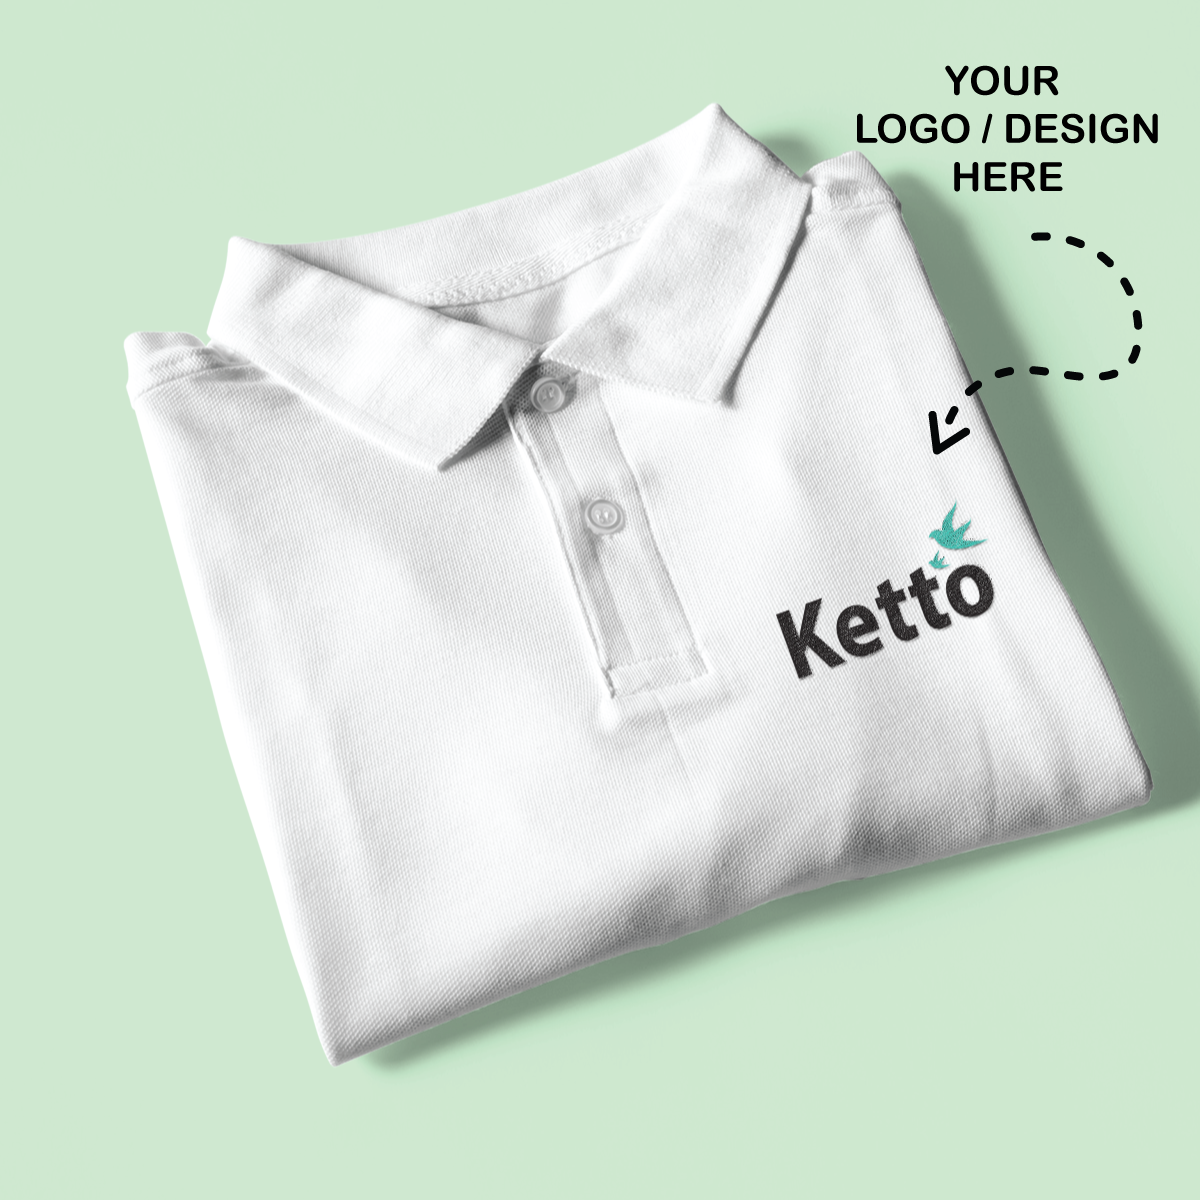 Personalized White Collar Polo Promotional T-Shirt for Corporate Gifting, Office Sports, Events, Festivals